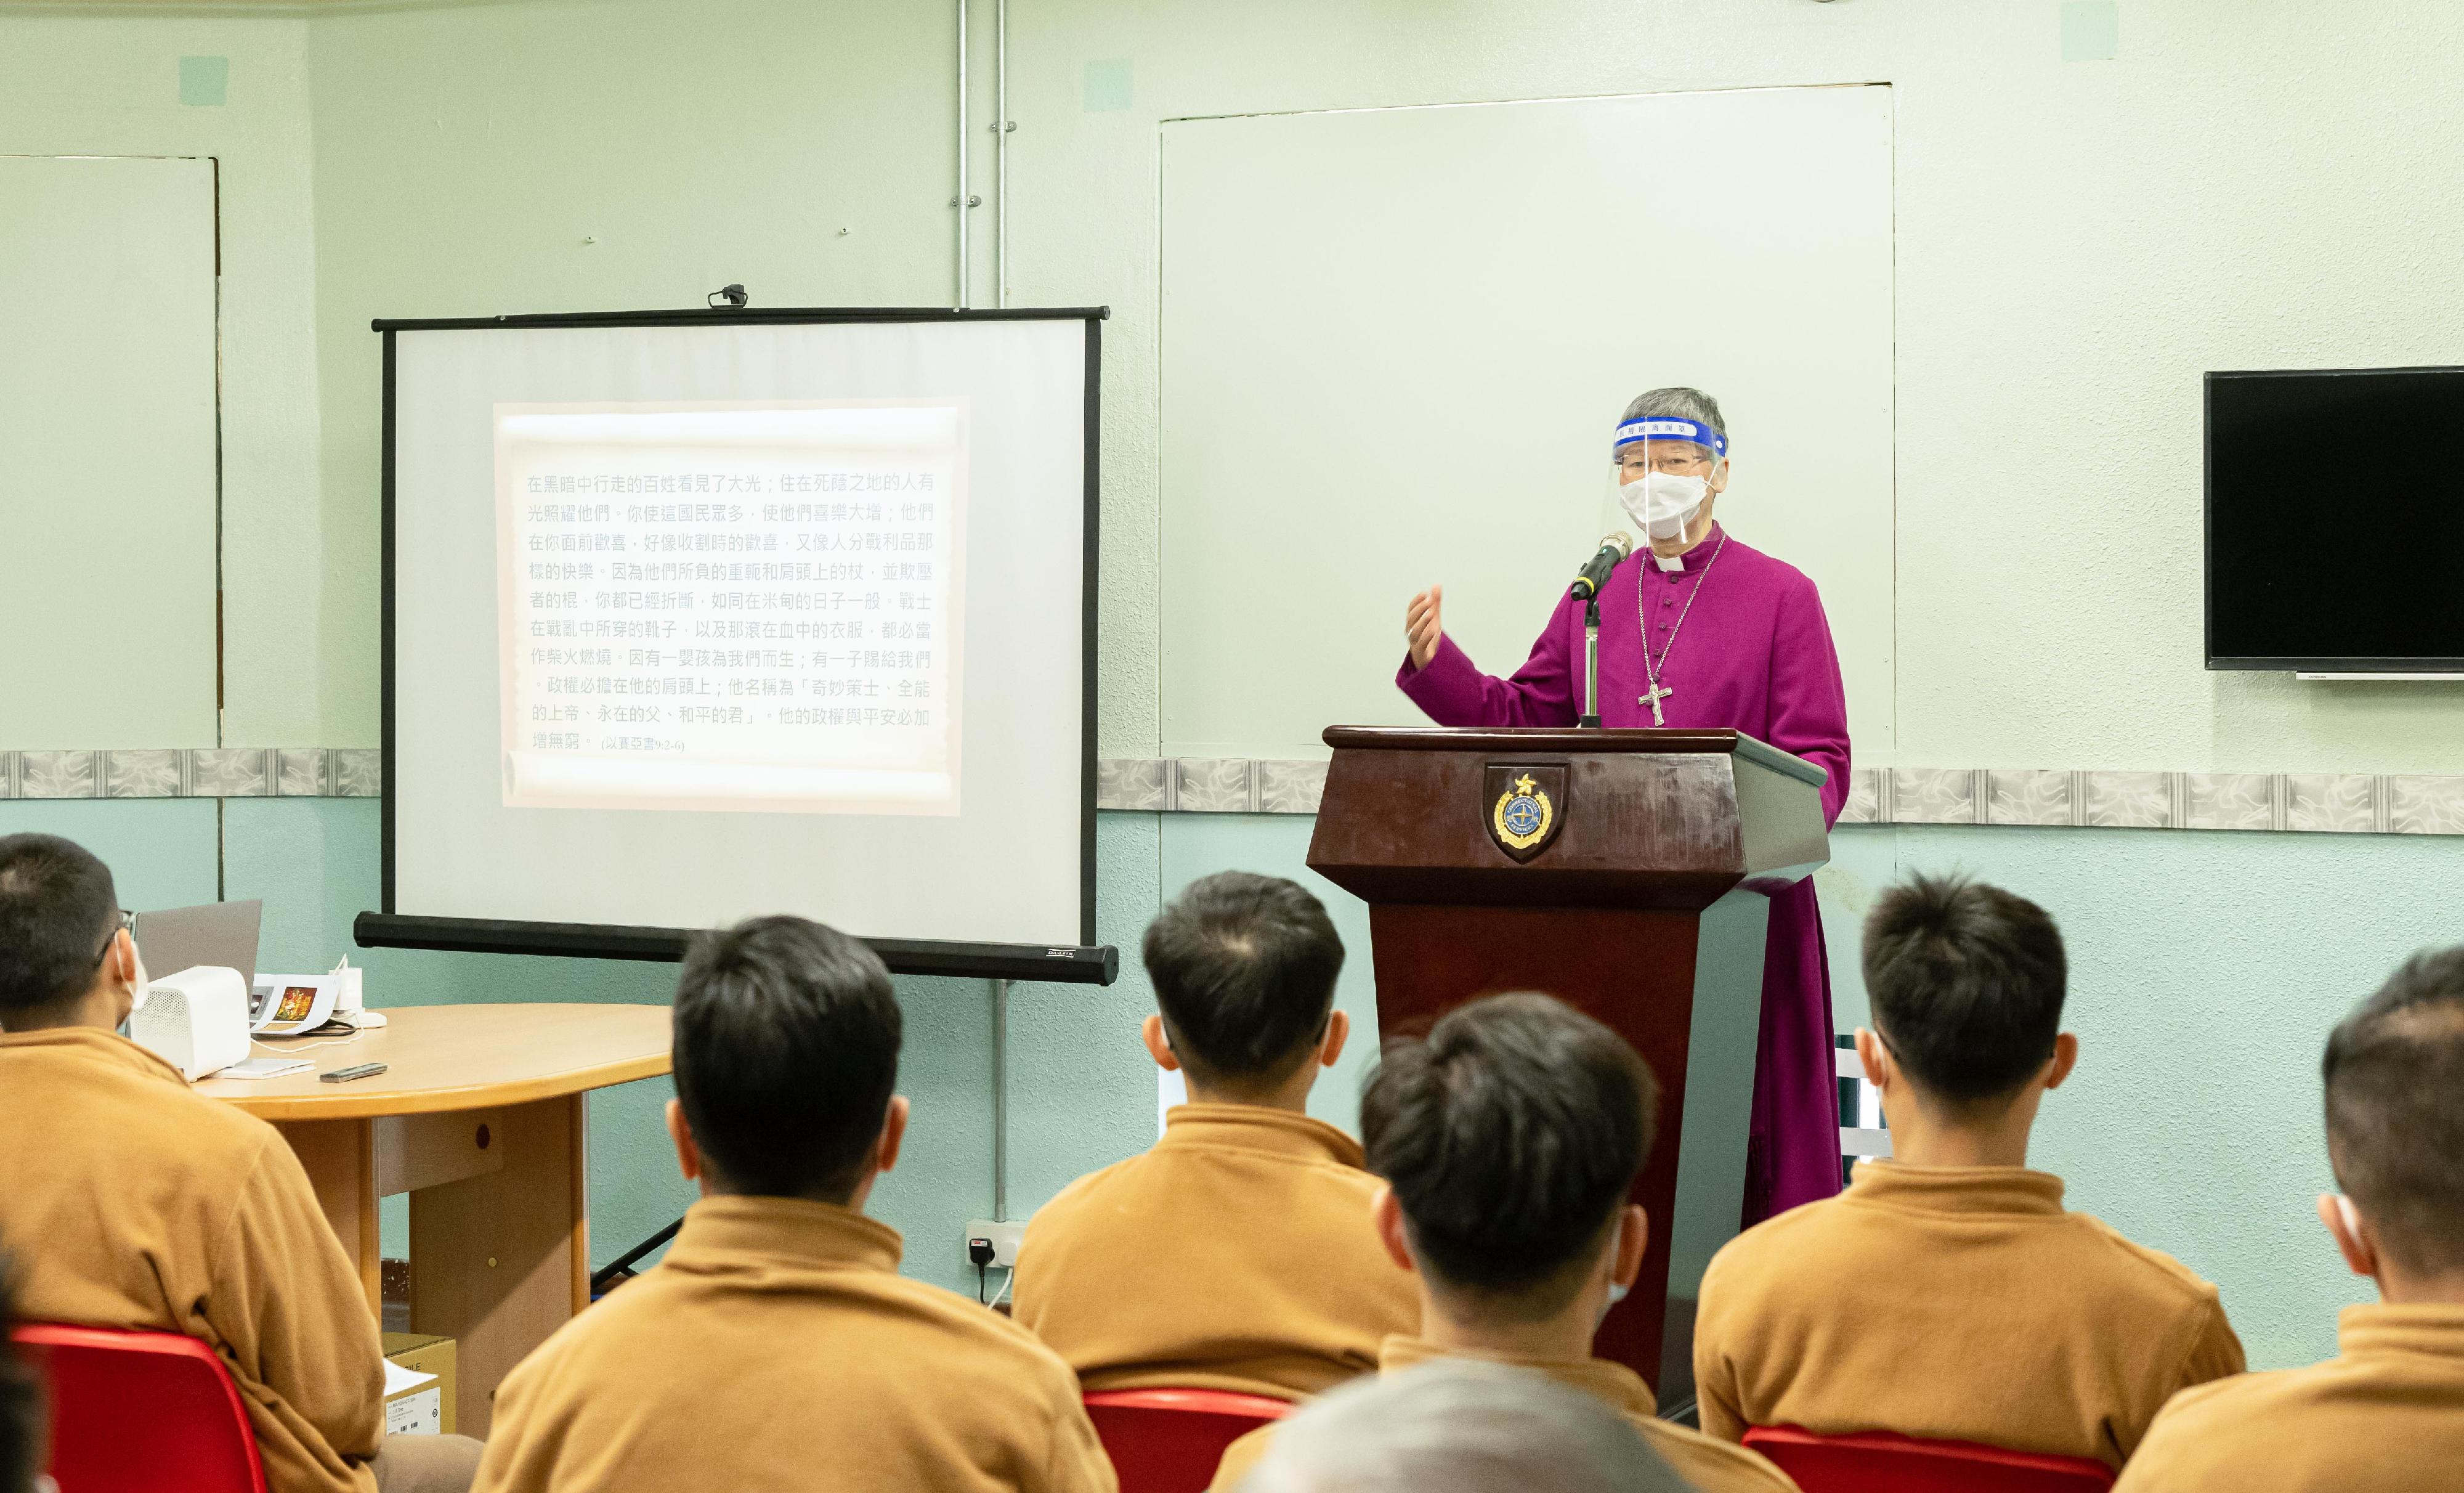 The Correctional Services Department has arranged for persons in custody to attend activities during the Christmas festive period. The Archbishop of Hong Kong, the Most Reverend Andrew Chan, visited Pak Sha Wan Correctional Institution and presided at a Christmas service on December 22.